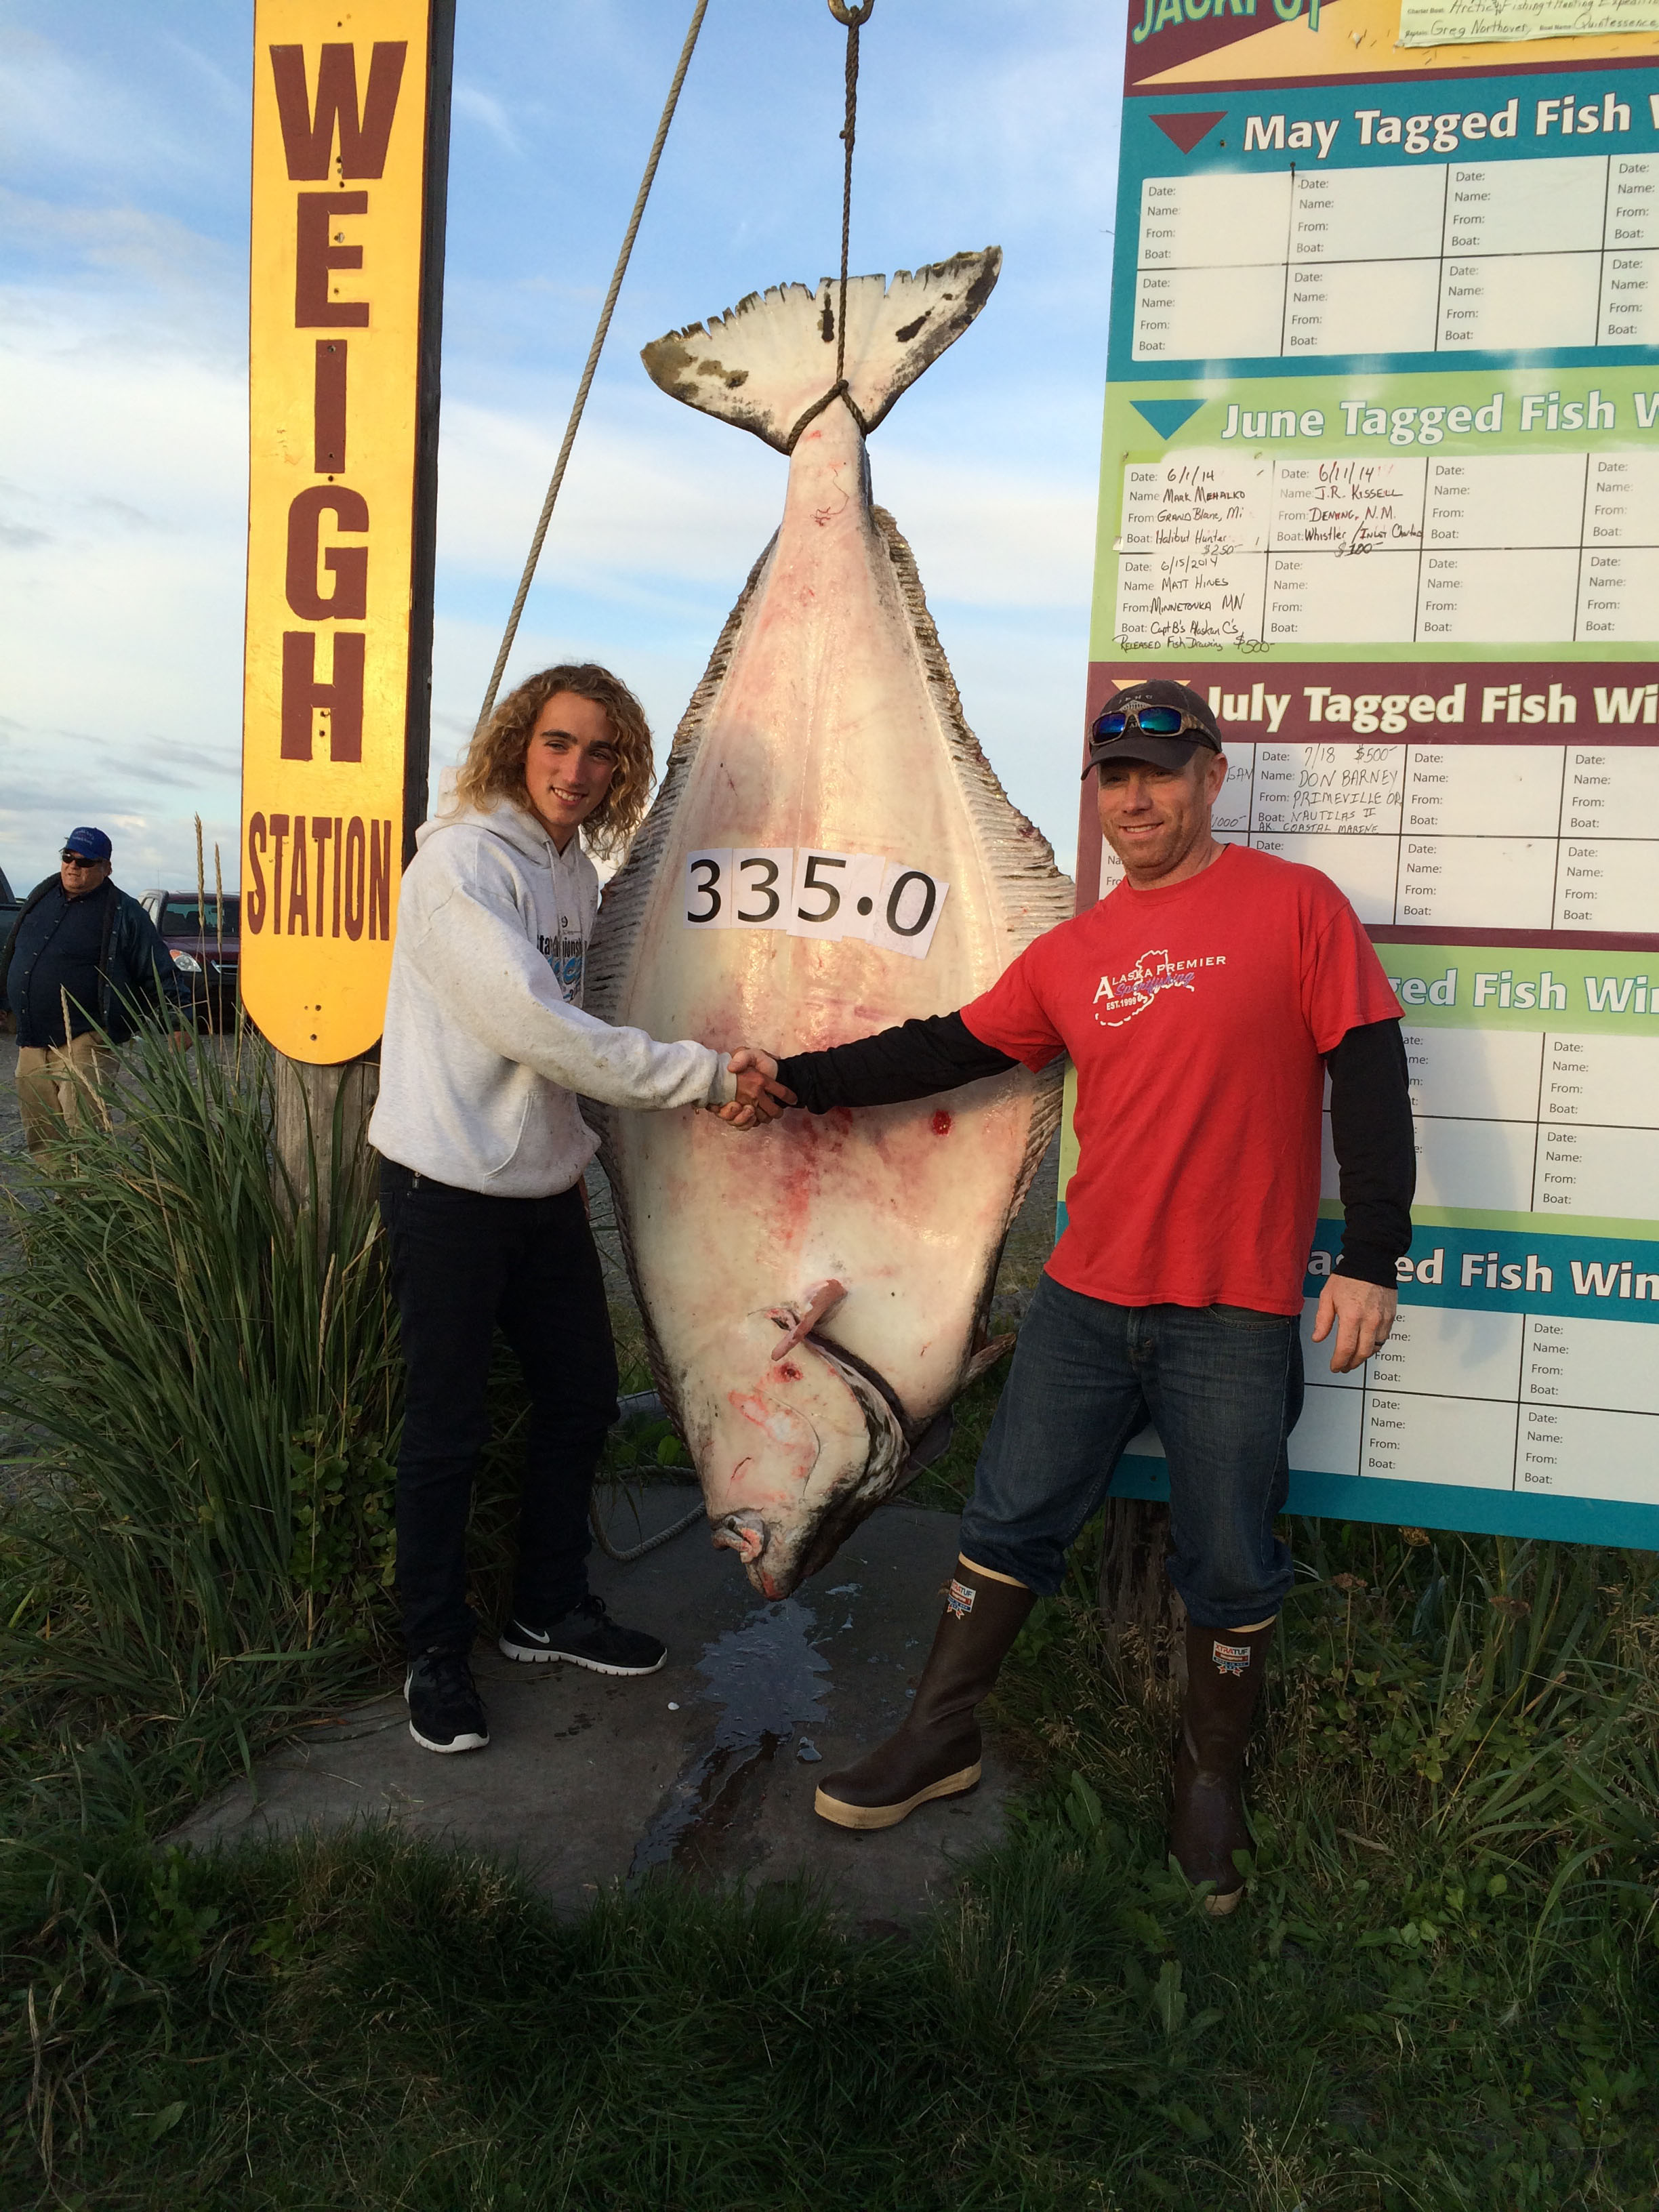 Jackson Hobbs, 16, of Franklin, Idaho, is congratulated by Capt. Travis Larson of Alaska Premier Sportfishing for the 335.0-pound halibut Hobbs caught while fishing with Larson on on Aug. 19, 2014. Hobbs’ fish was worth $16,731.50 in last year’s jackpot halibut derby.-Photo Provided